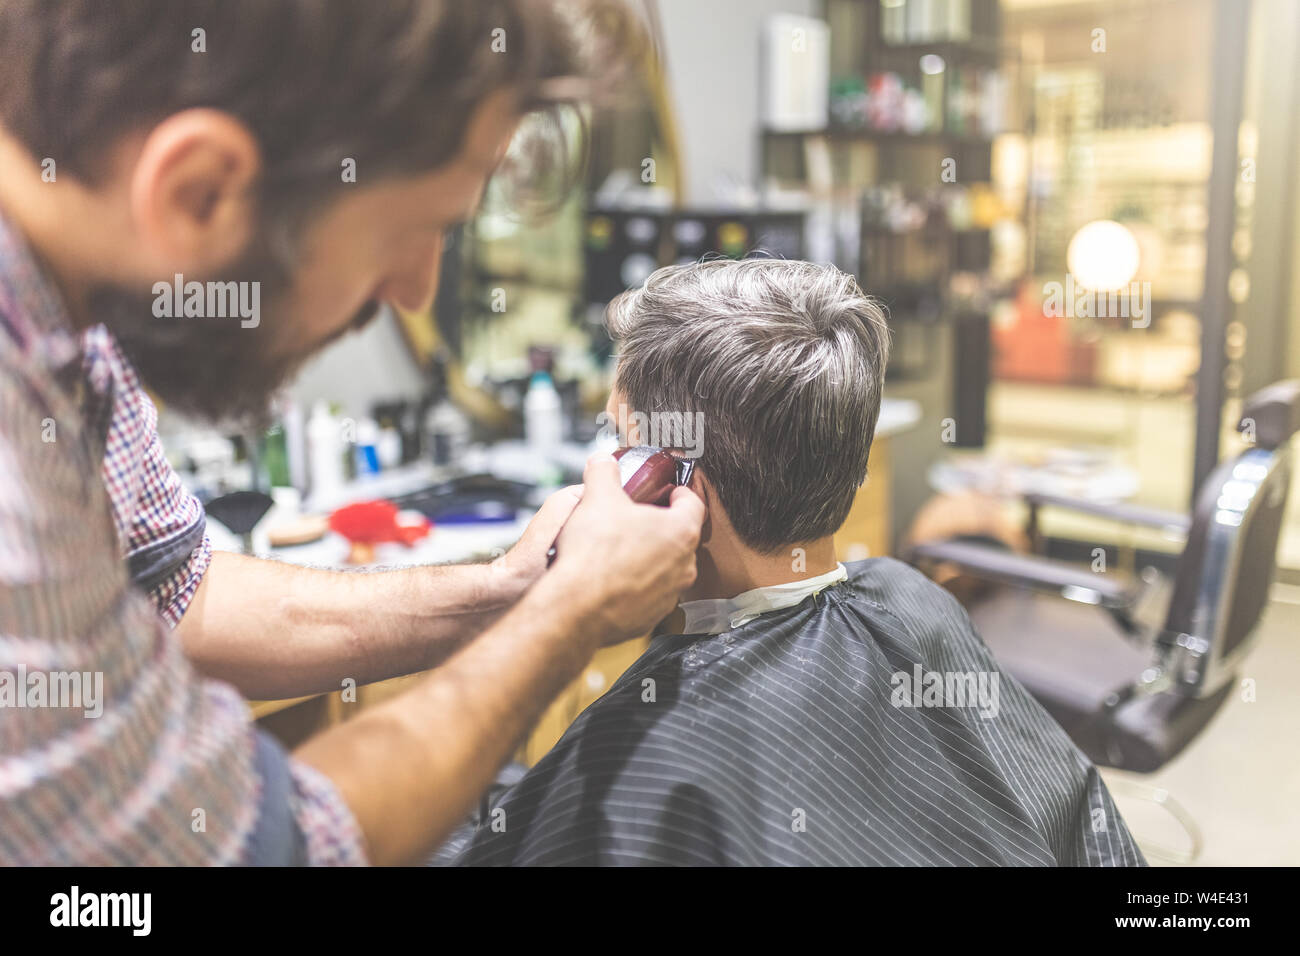 Barber styling hair of his client with clipper. Stock Photo